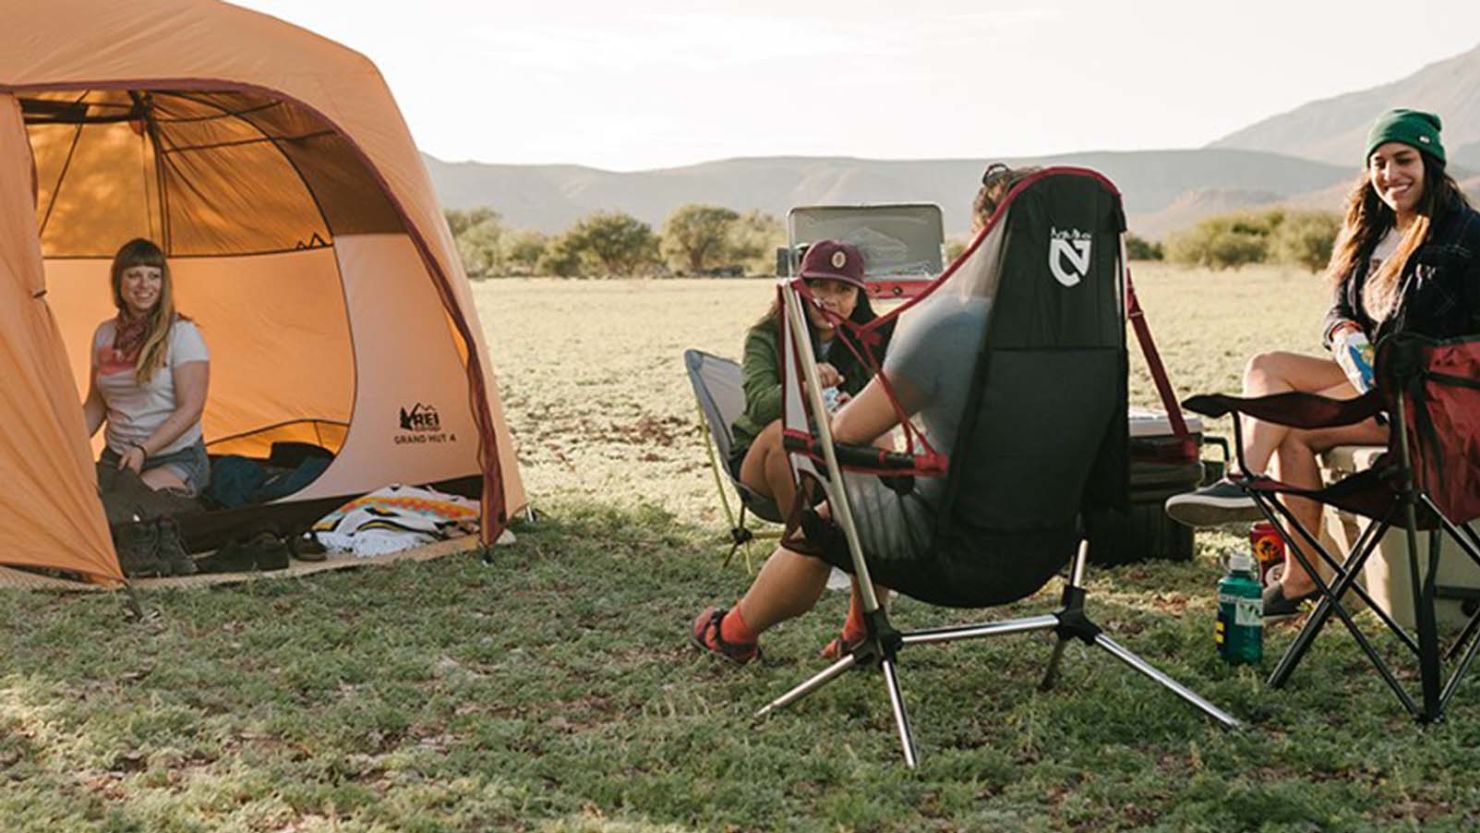 Camping x Tech: Investors Go All-in on the Outdoors